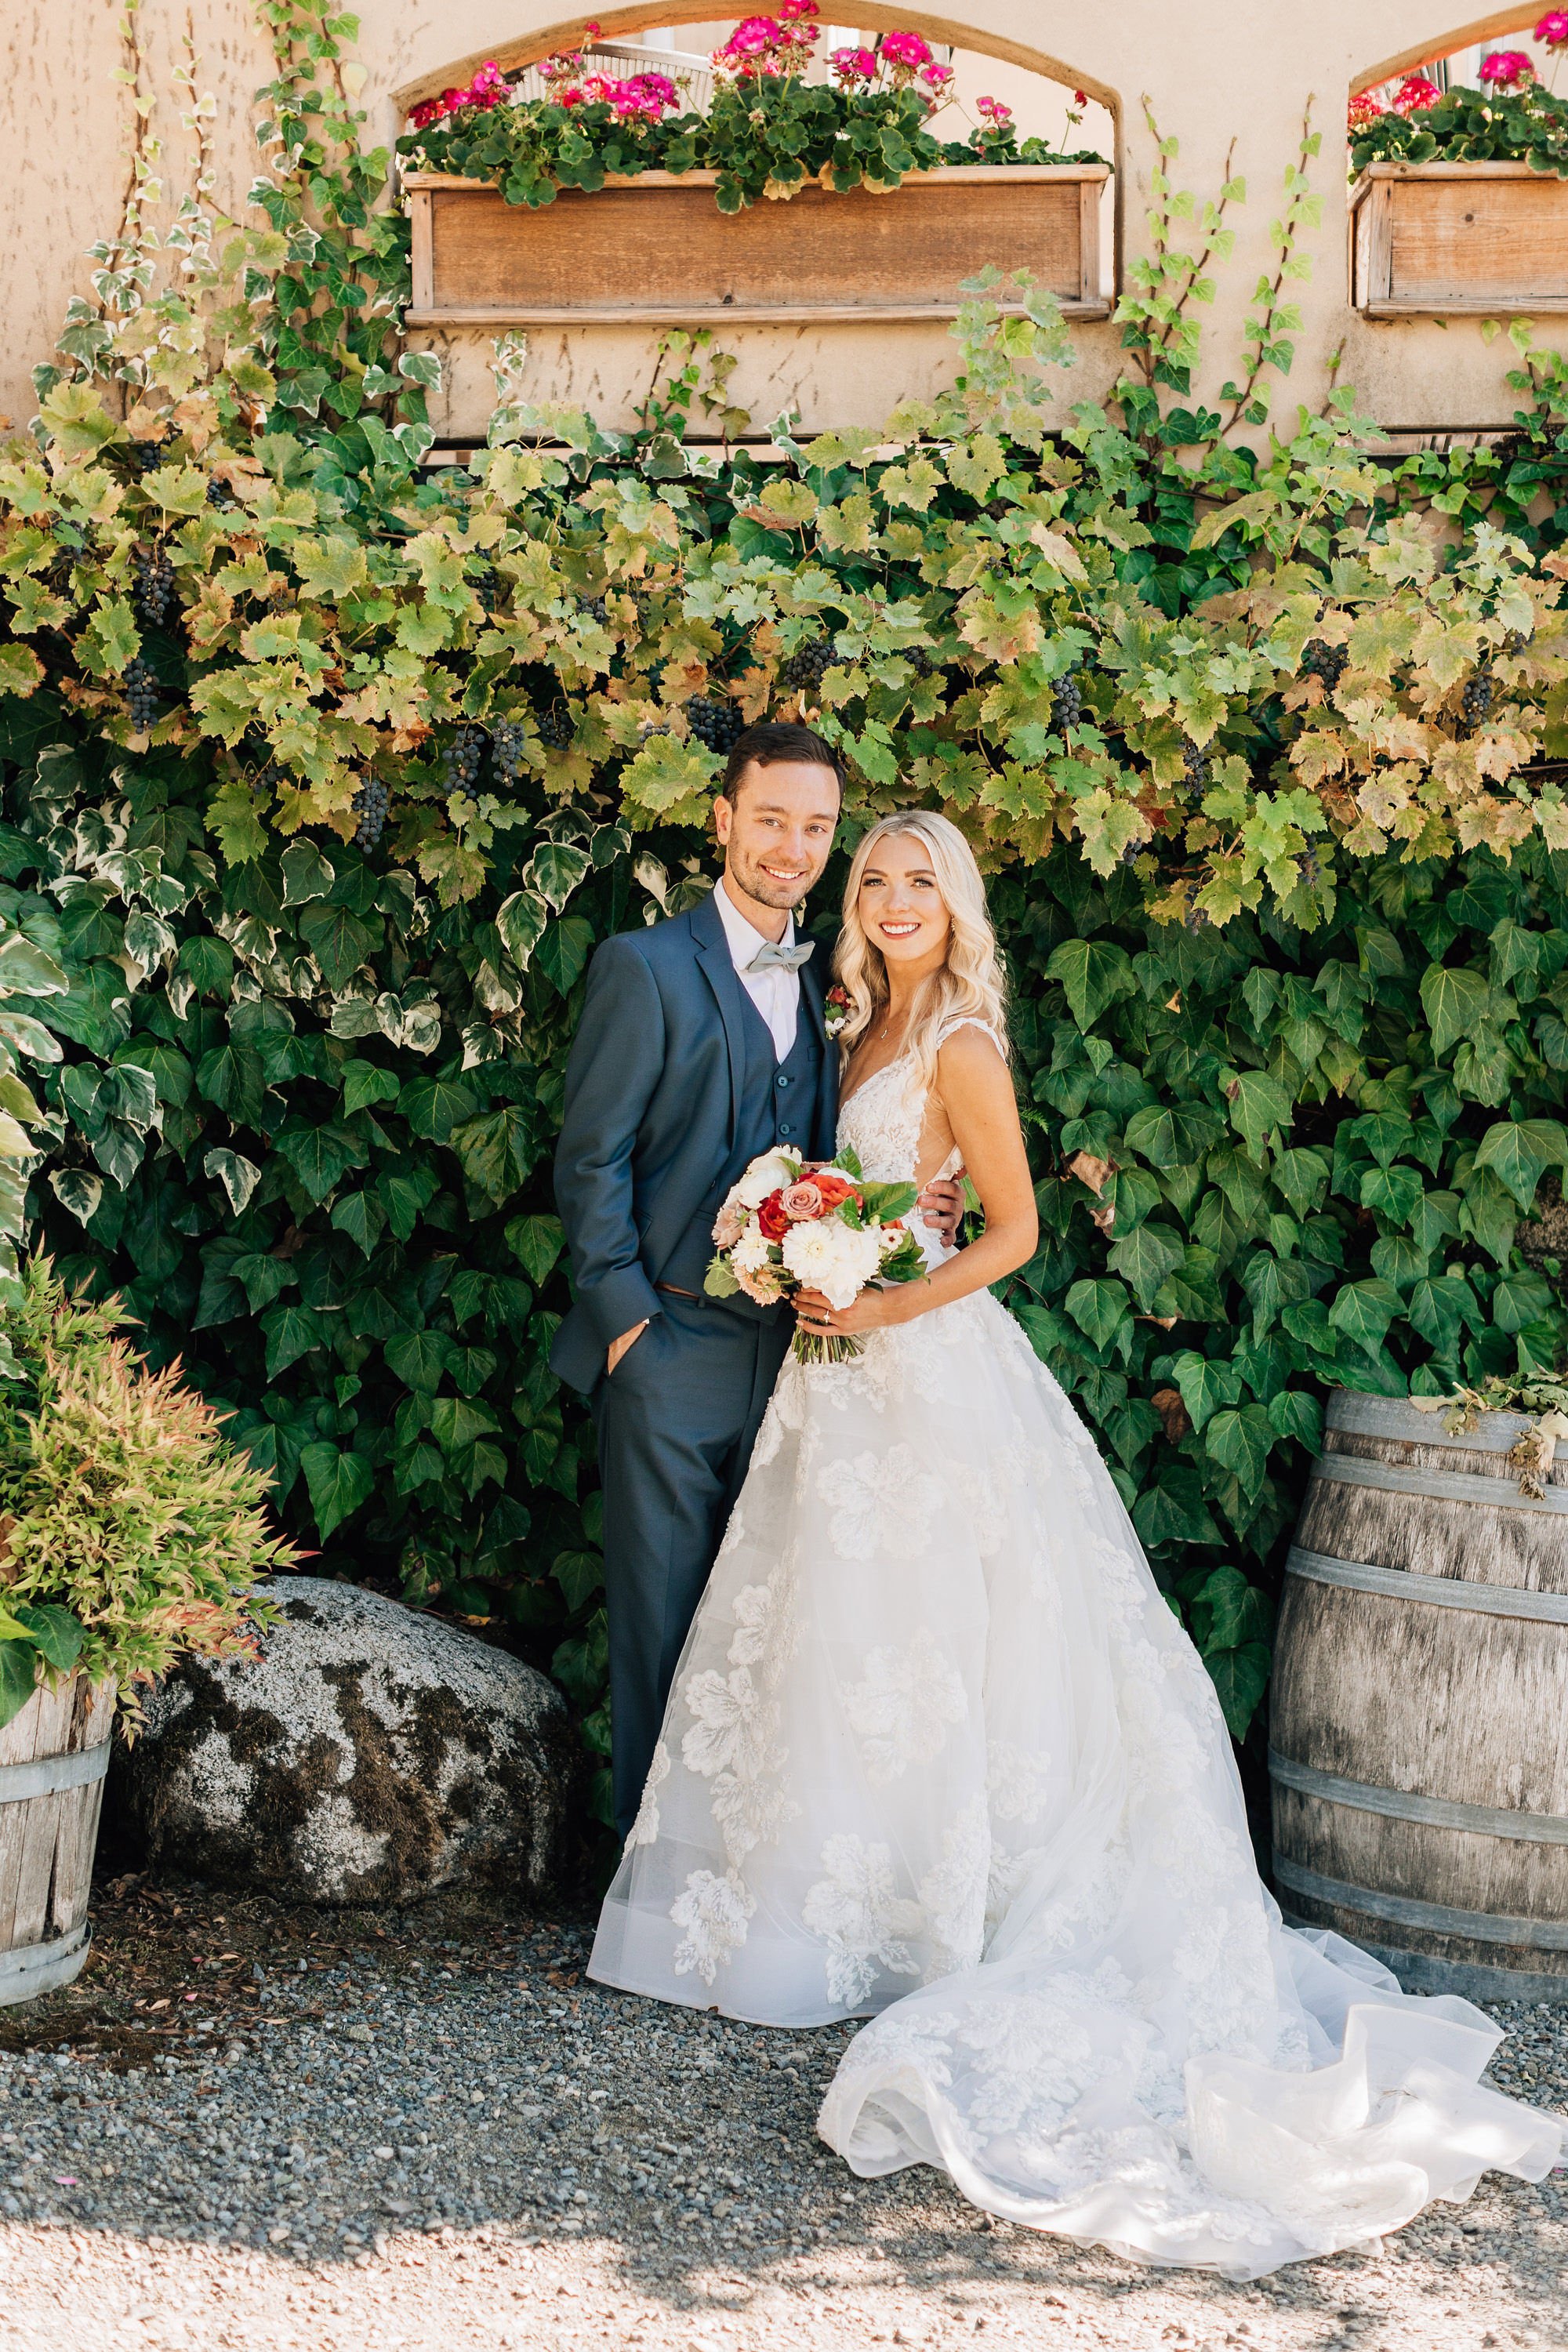 Chateau-lill-wedding-photos-bride-and-groom-portraits-jenna-bechtholt-photography-seattle-wedding-planners-pacific-engagements-wedding-planning-and-design